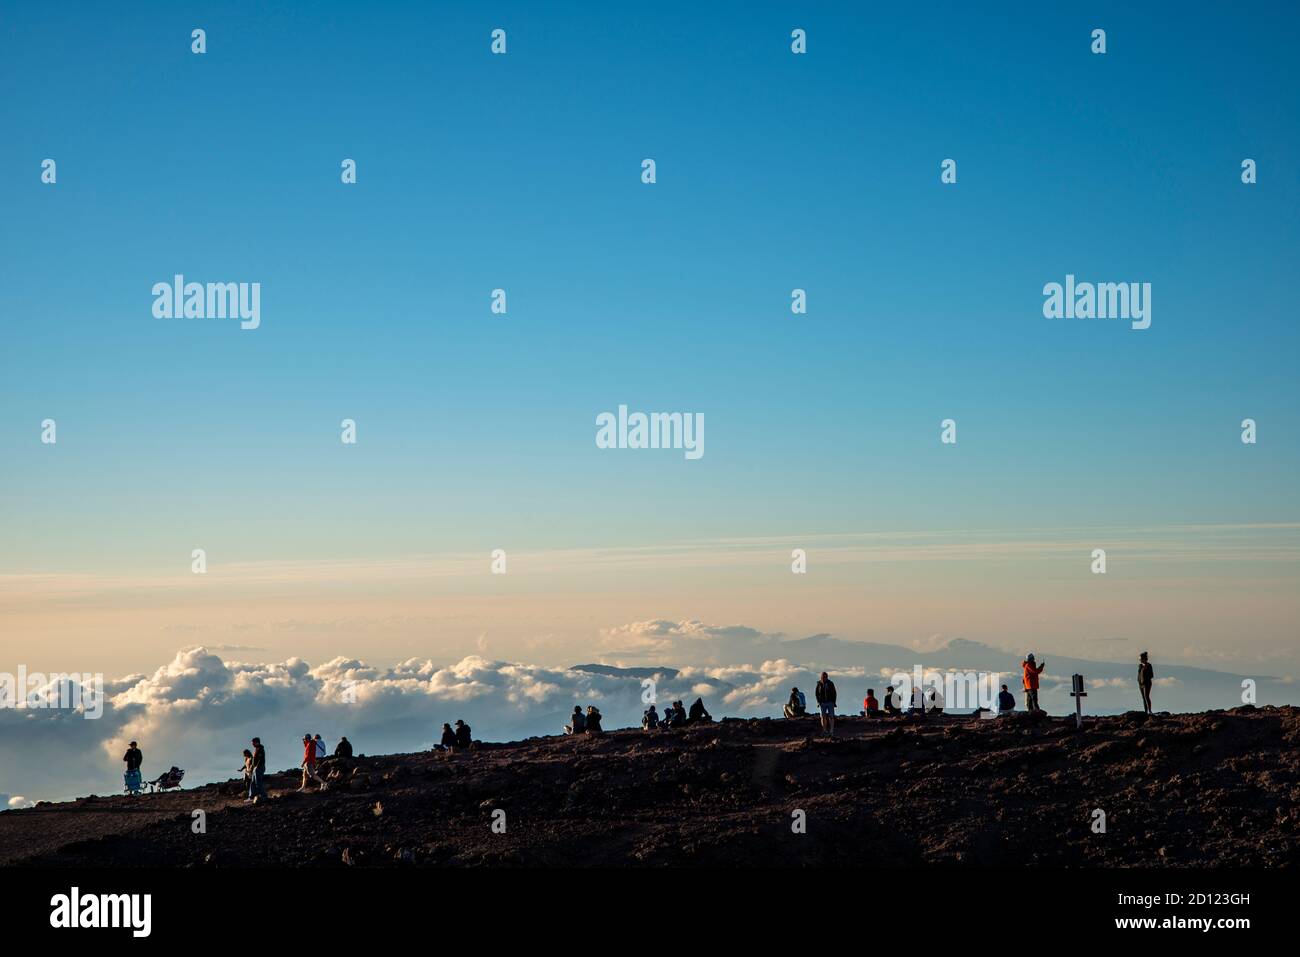 Maui, Hawaii.  Visitors on the Haleakala Crater in the Haleakala National Park watch the sunset while above the clouds. Stock Photo